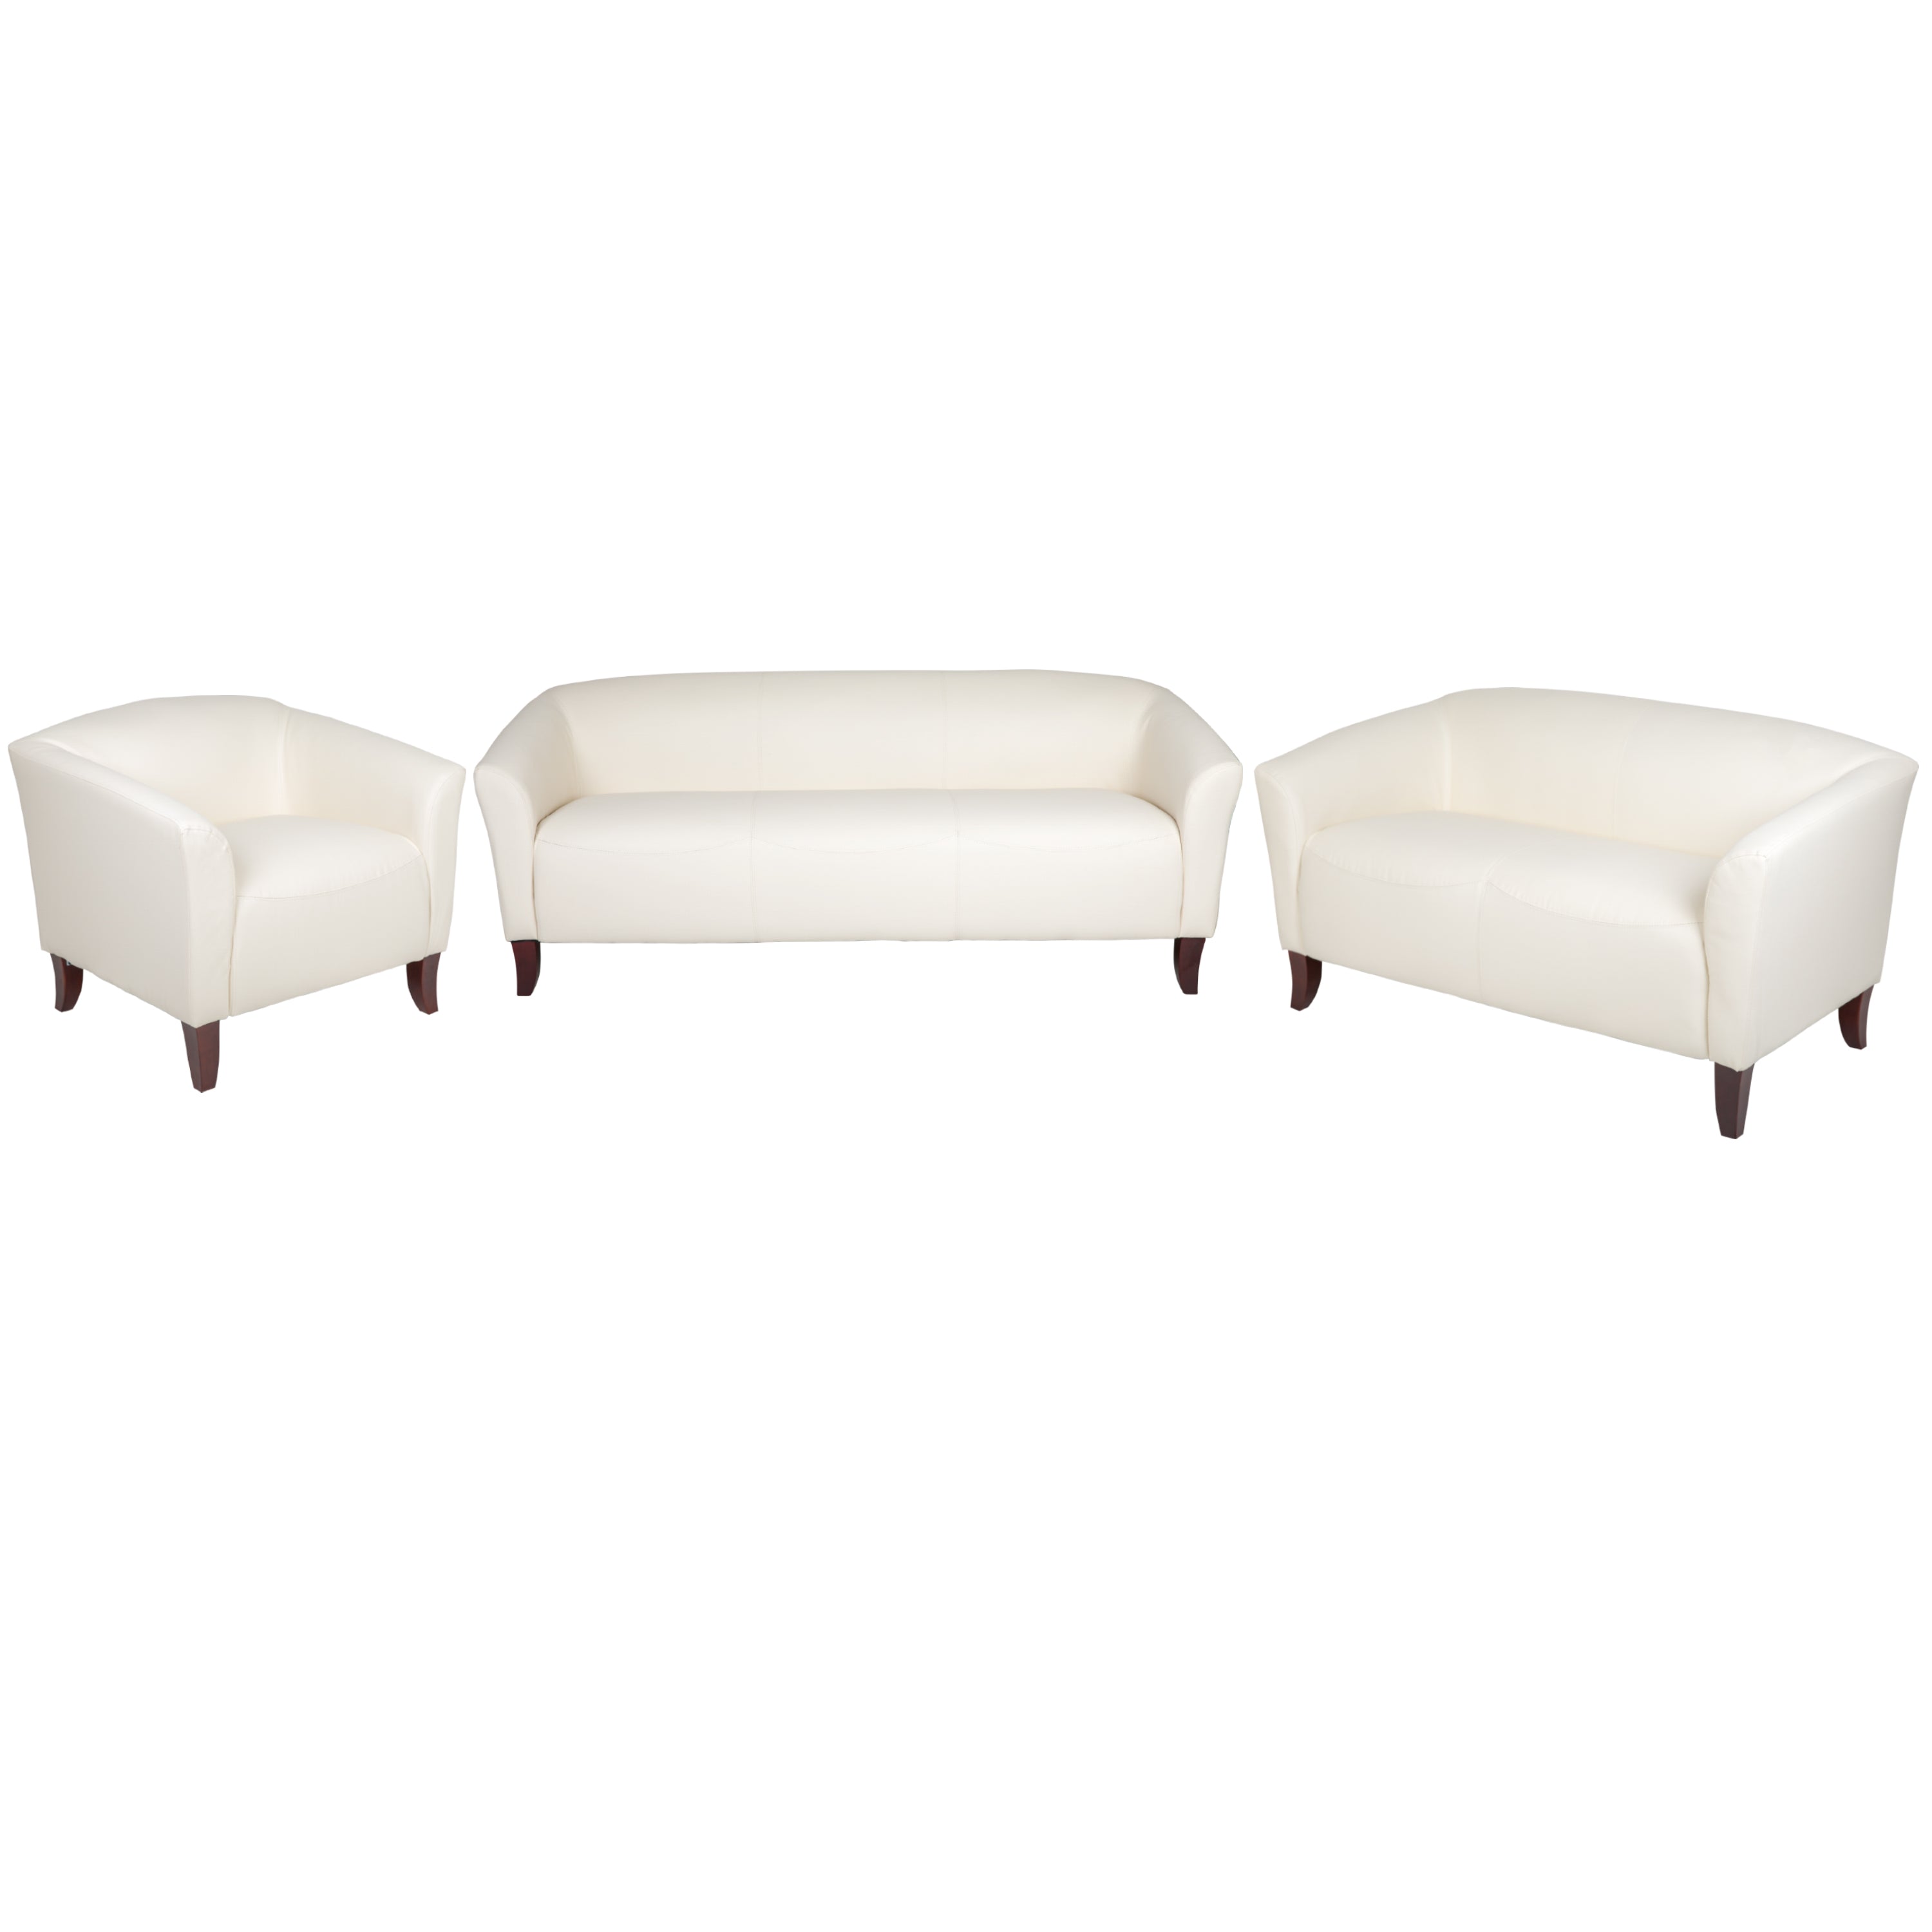 HERCULES Imperial Series Reception Set with Cherry Wood Feet-Reception Set-Flash Furniture-Wall2Wall Furnishings